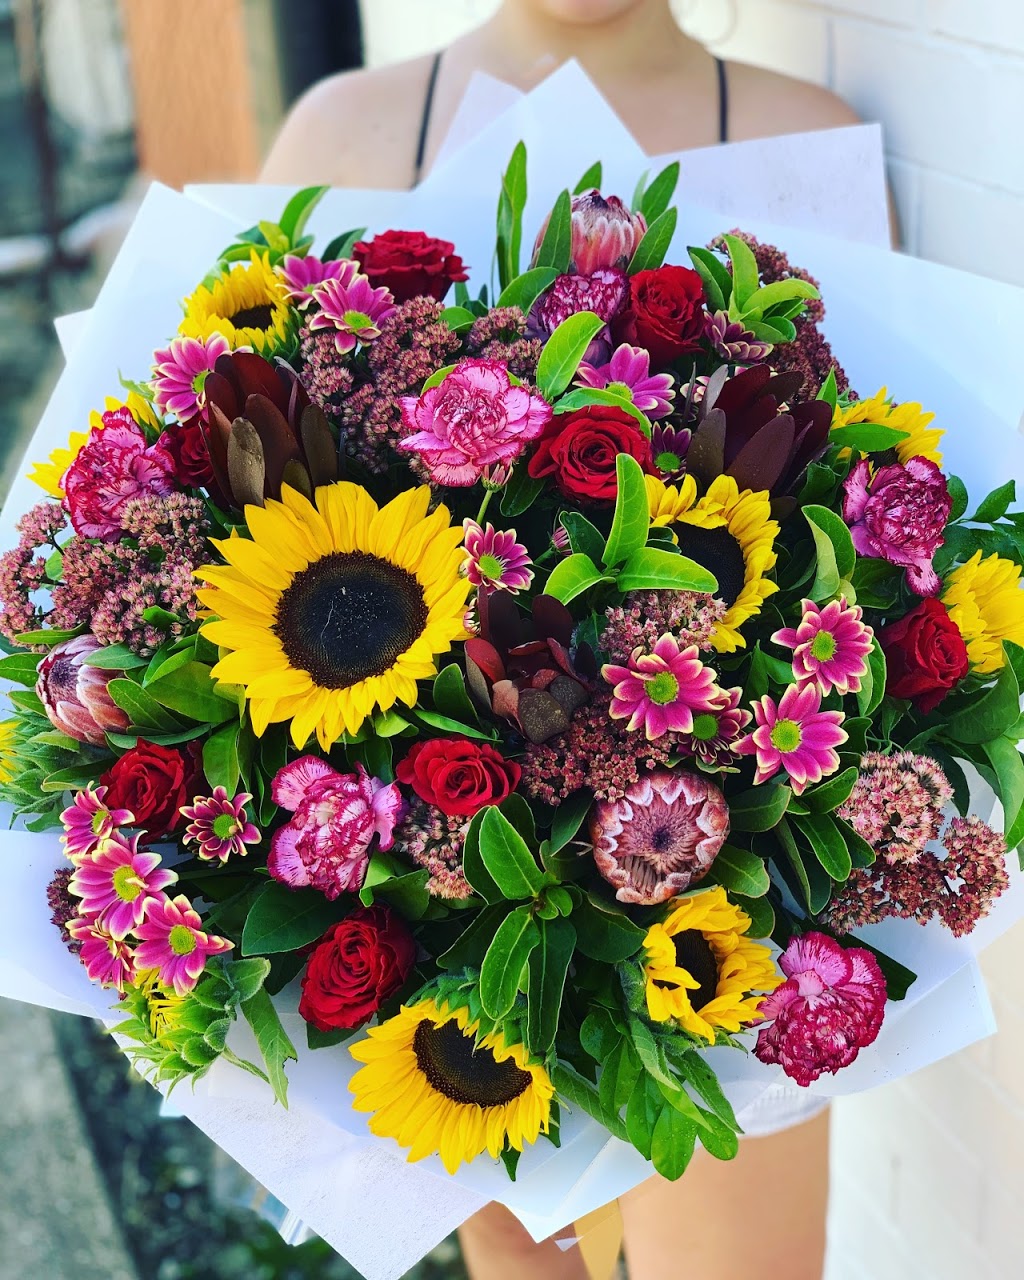 Redcliffe City Florist | 261 Victoria Ave, Redcliffe QLD 4020, Australia | Phone: (07) 3883 3000